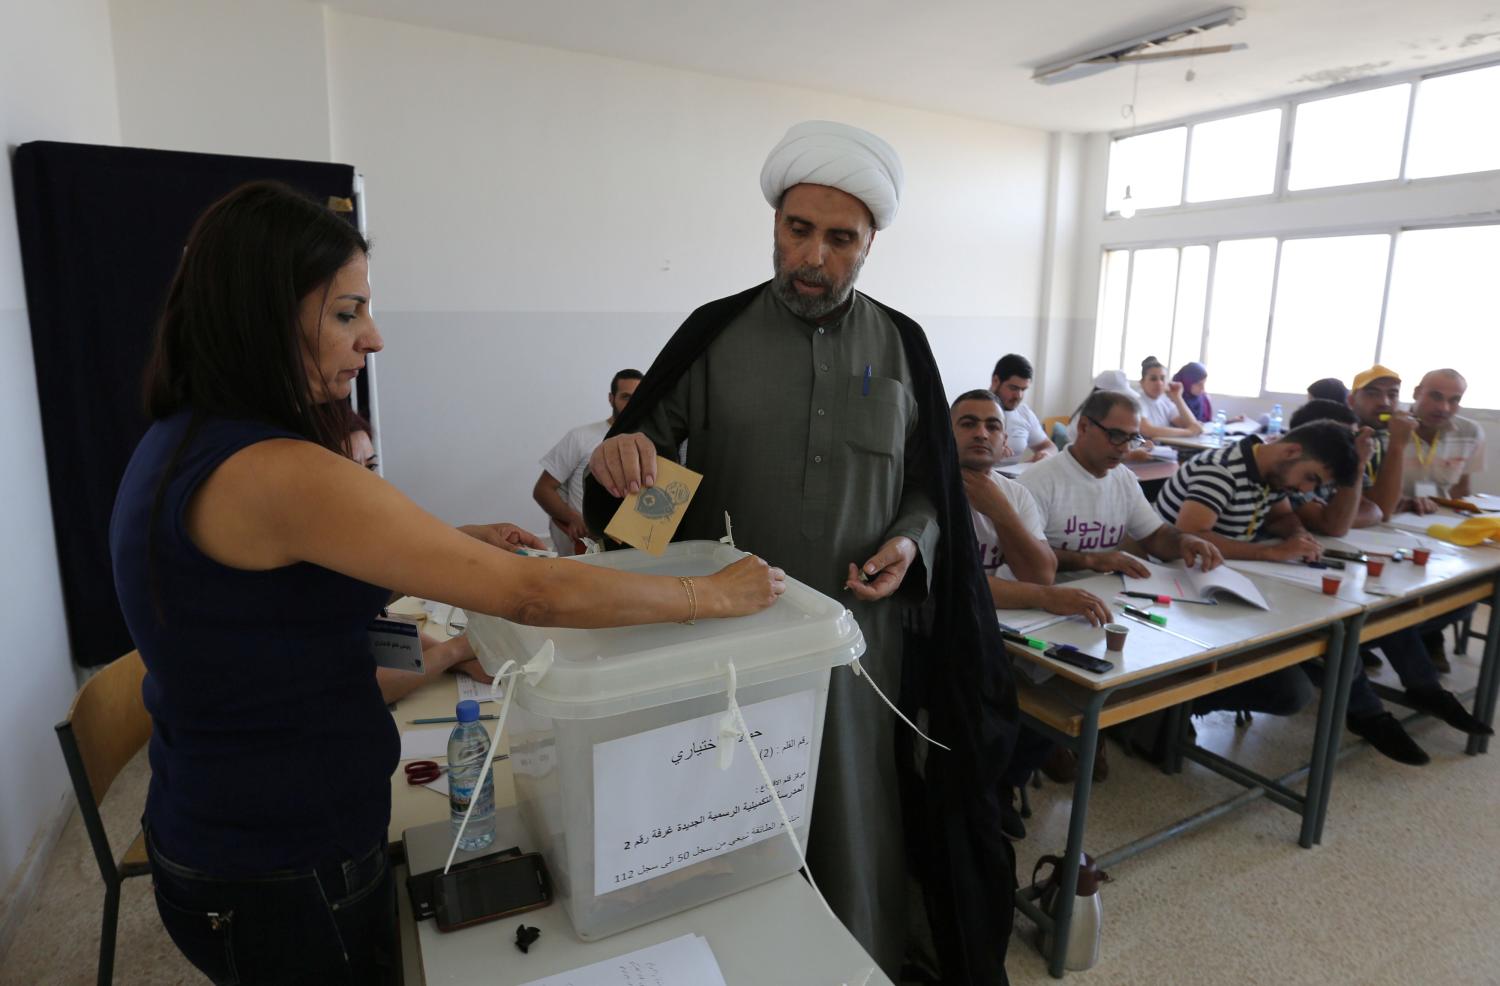 A Muslim Sheikh casts his ballot at a polling station during municipal elections in Houla village, southern Lebanon, May 22, 2016. REUTERS/Aziz Taher - S1BETFNDFFAA